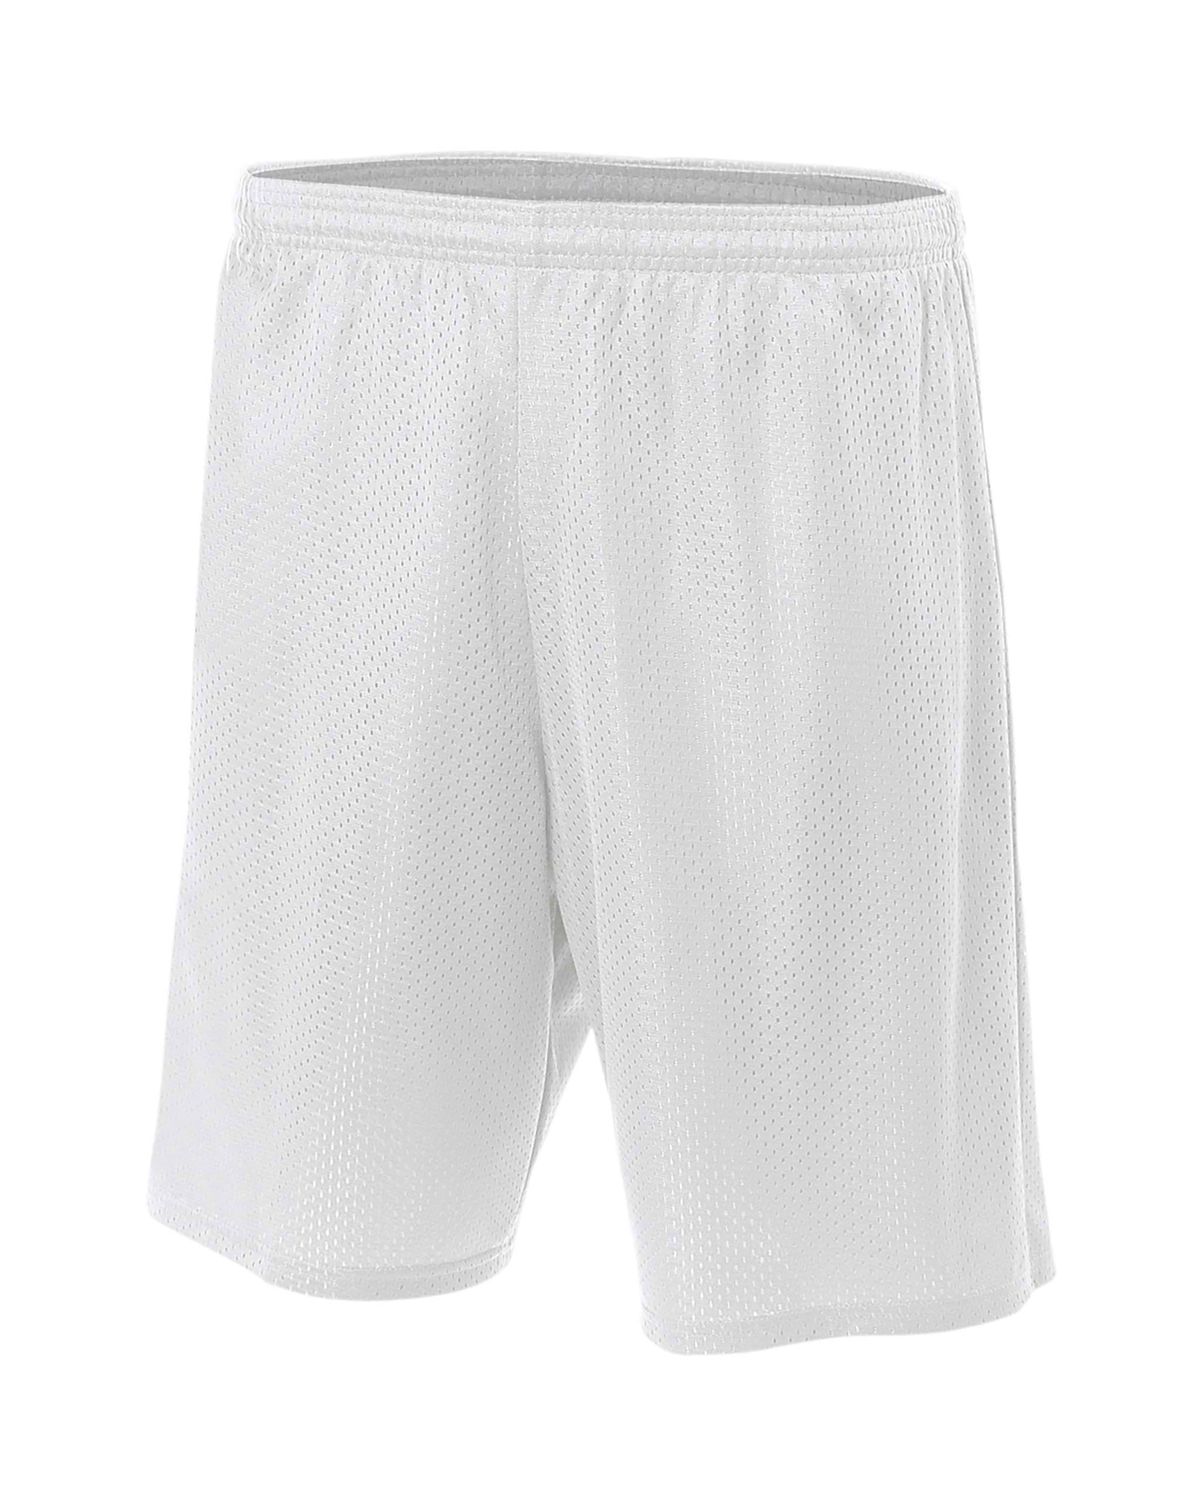 'A4 N5293 Adult Seven Inch Inseam Polyester Mesh Short'